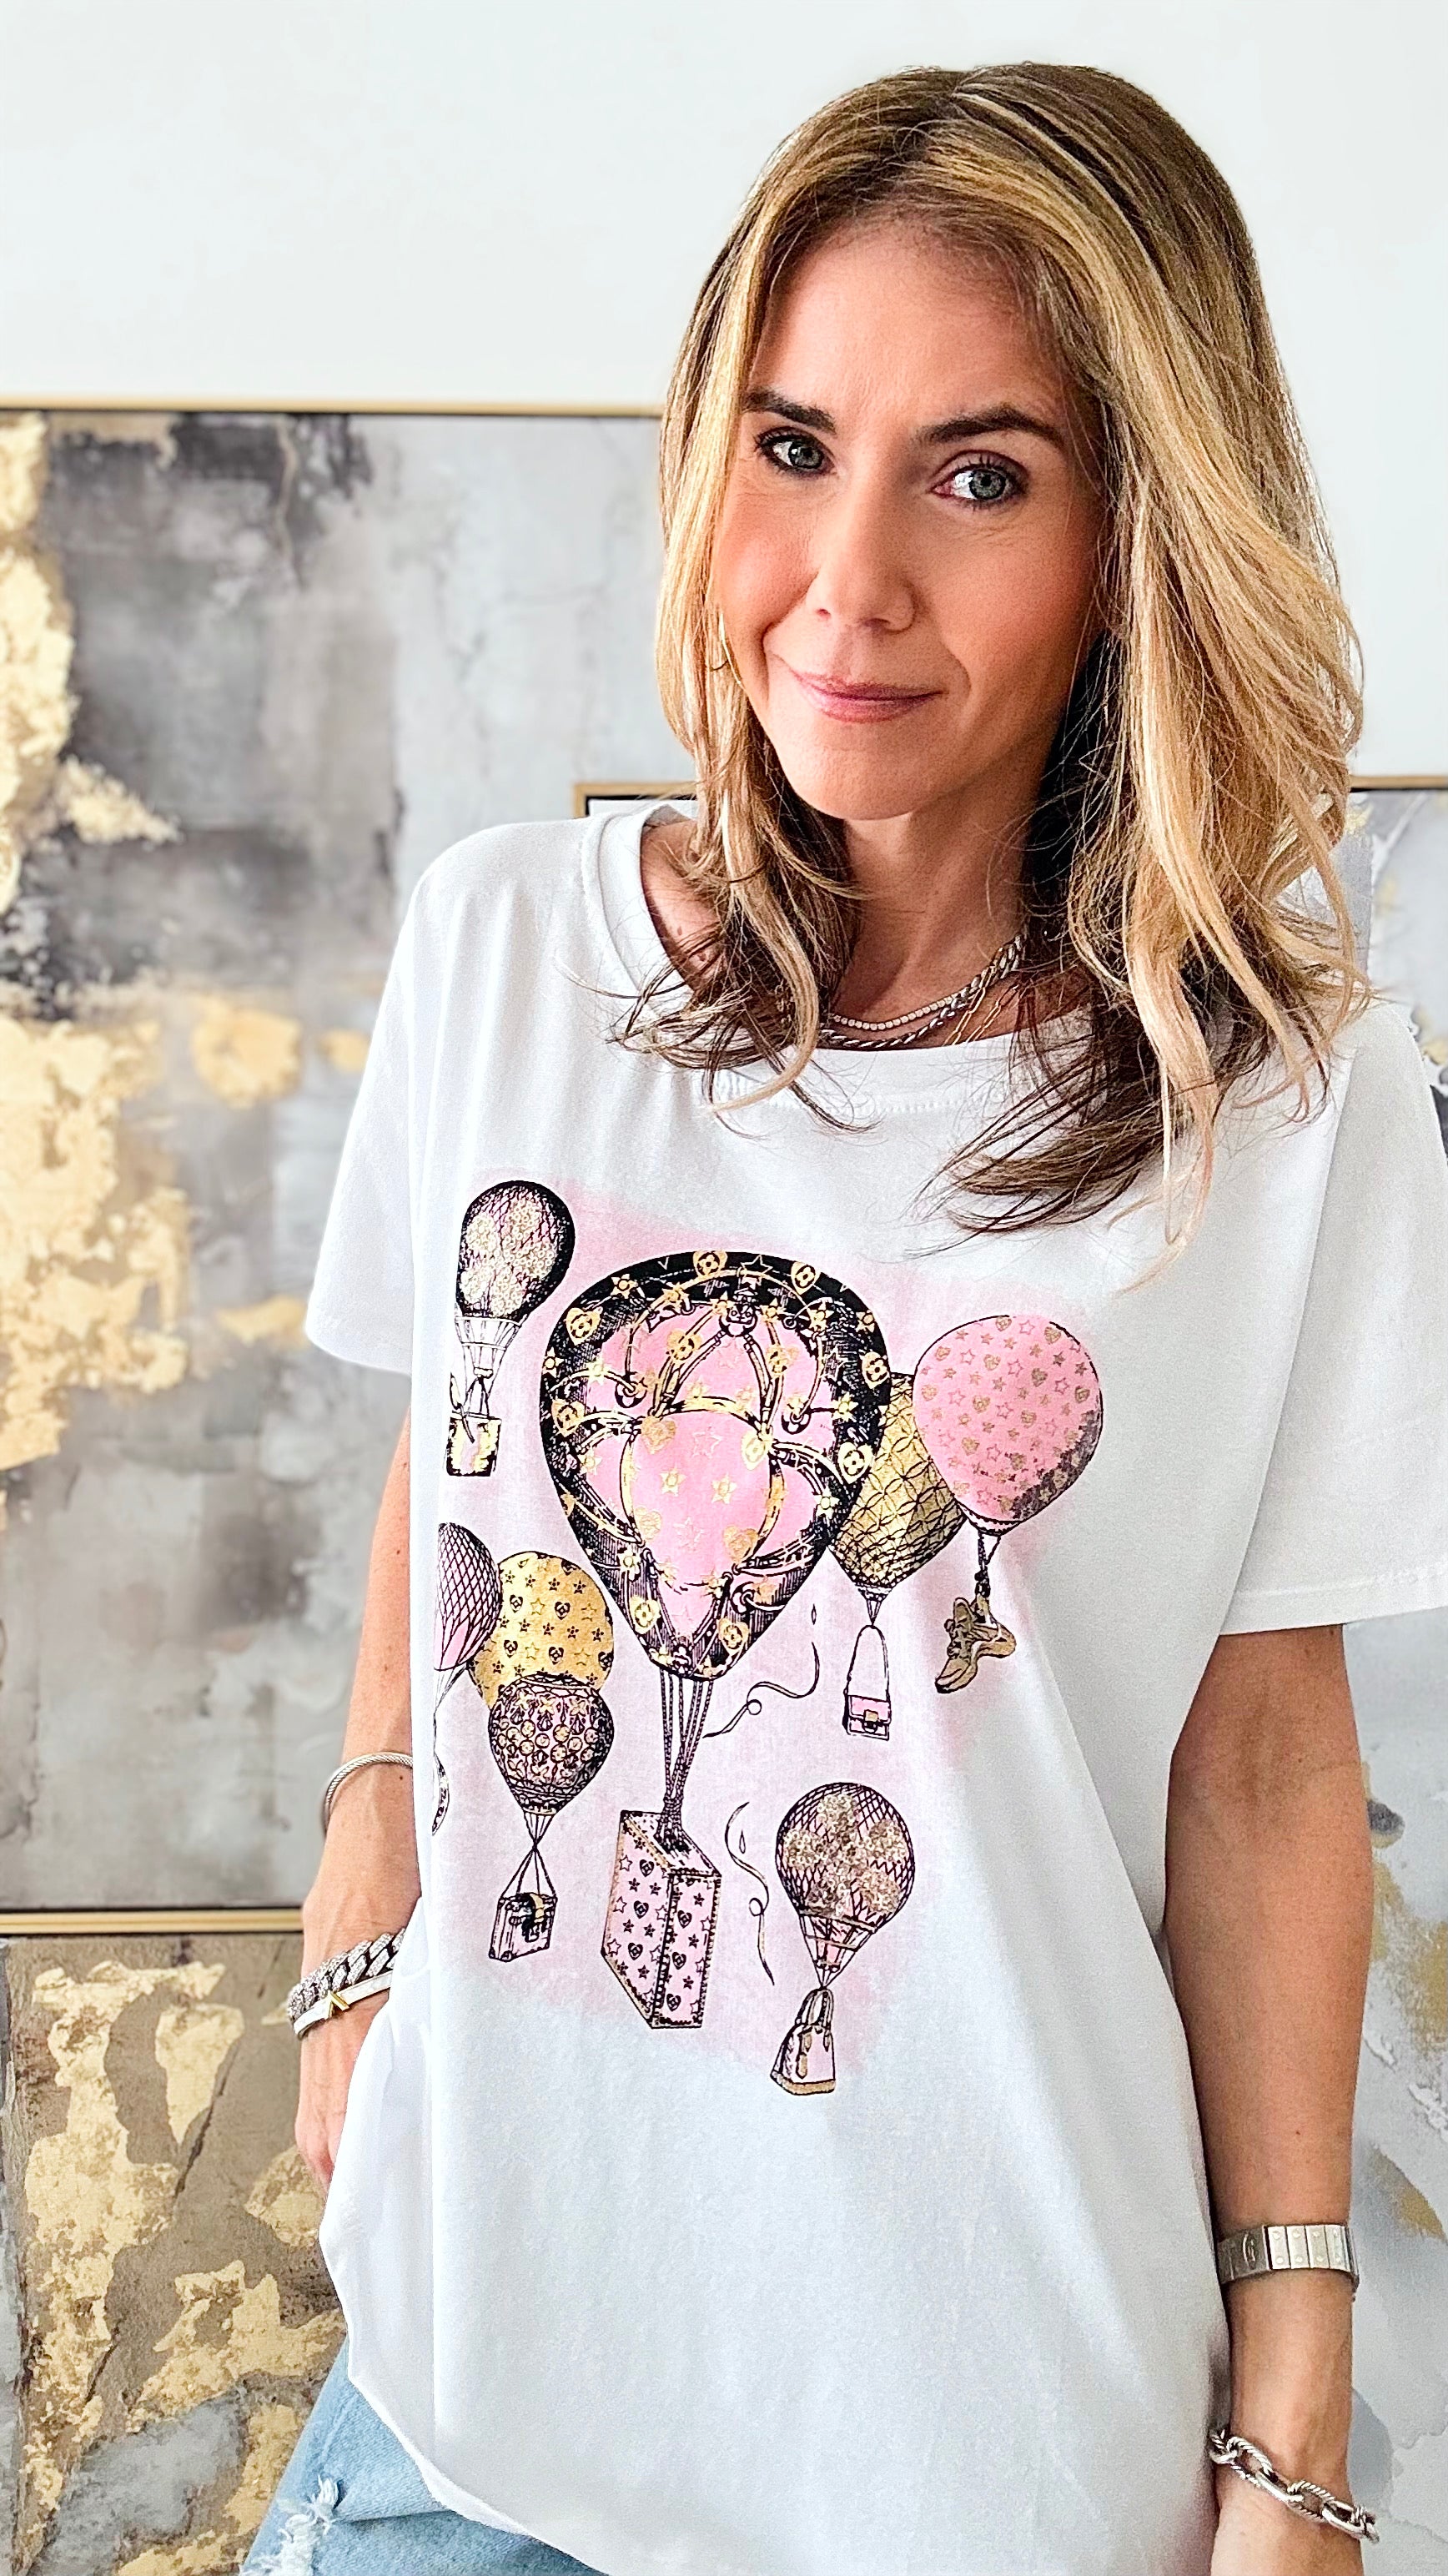 Trouble In The Sky Italian Graphic Tee - White/Pink-110 Short Sleeve Tops-Italianissimo-Coastal Bloom Boutique, find the trendiest versions of the popular styles and looks Located in Indialantic, FL